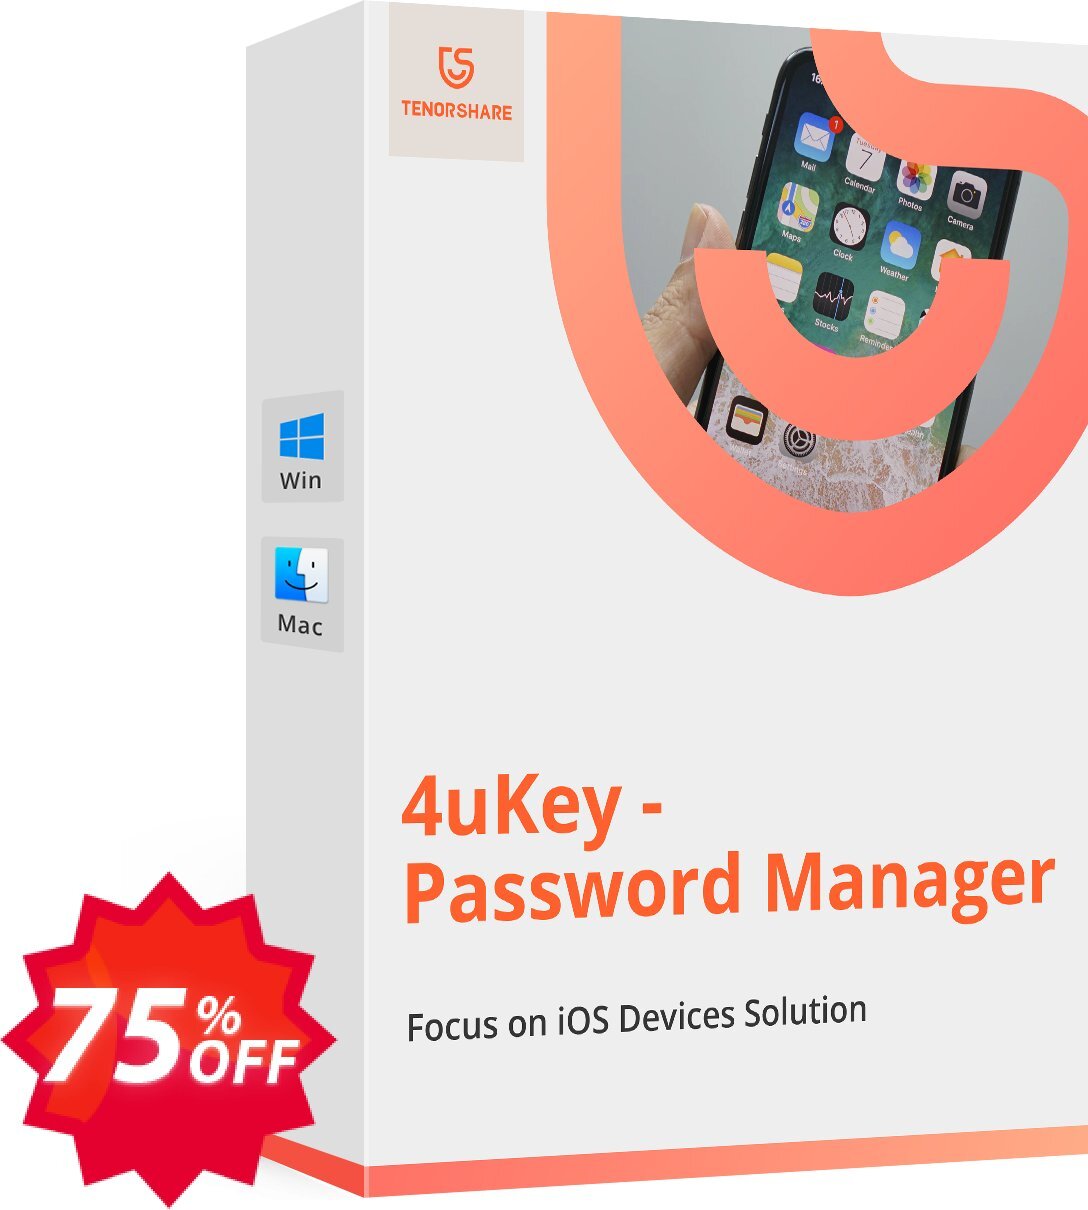 Tenorshare 4uKey Password Manager Coupon code 75% discount 